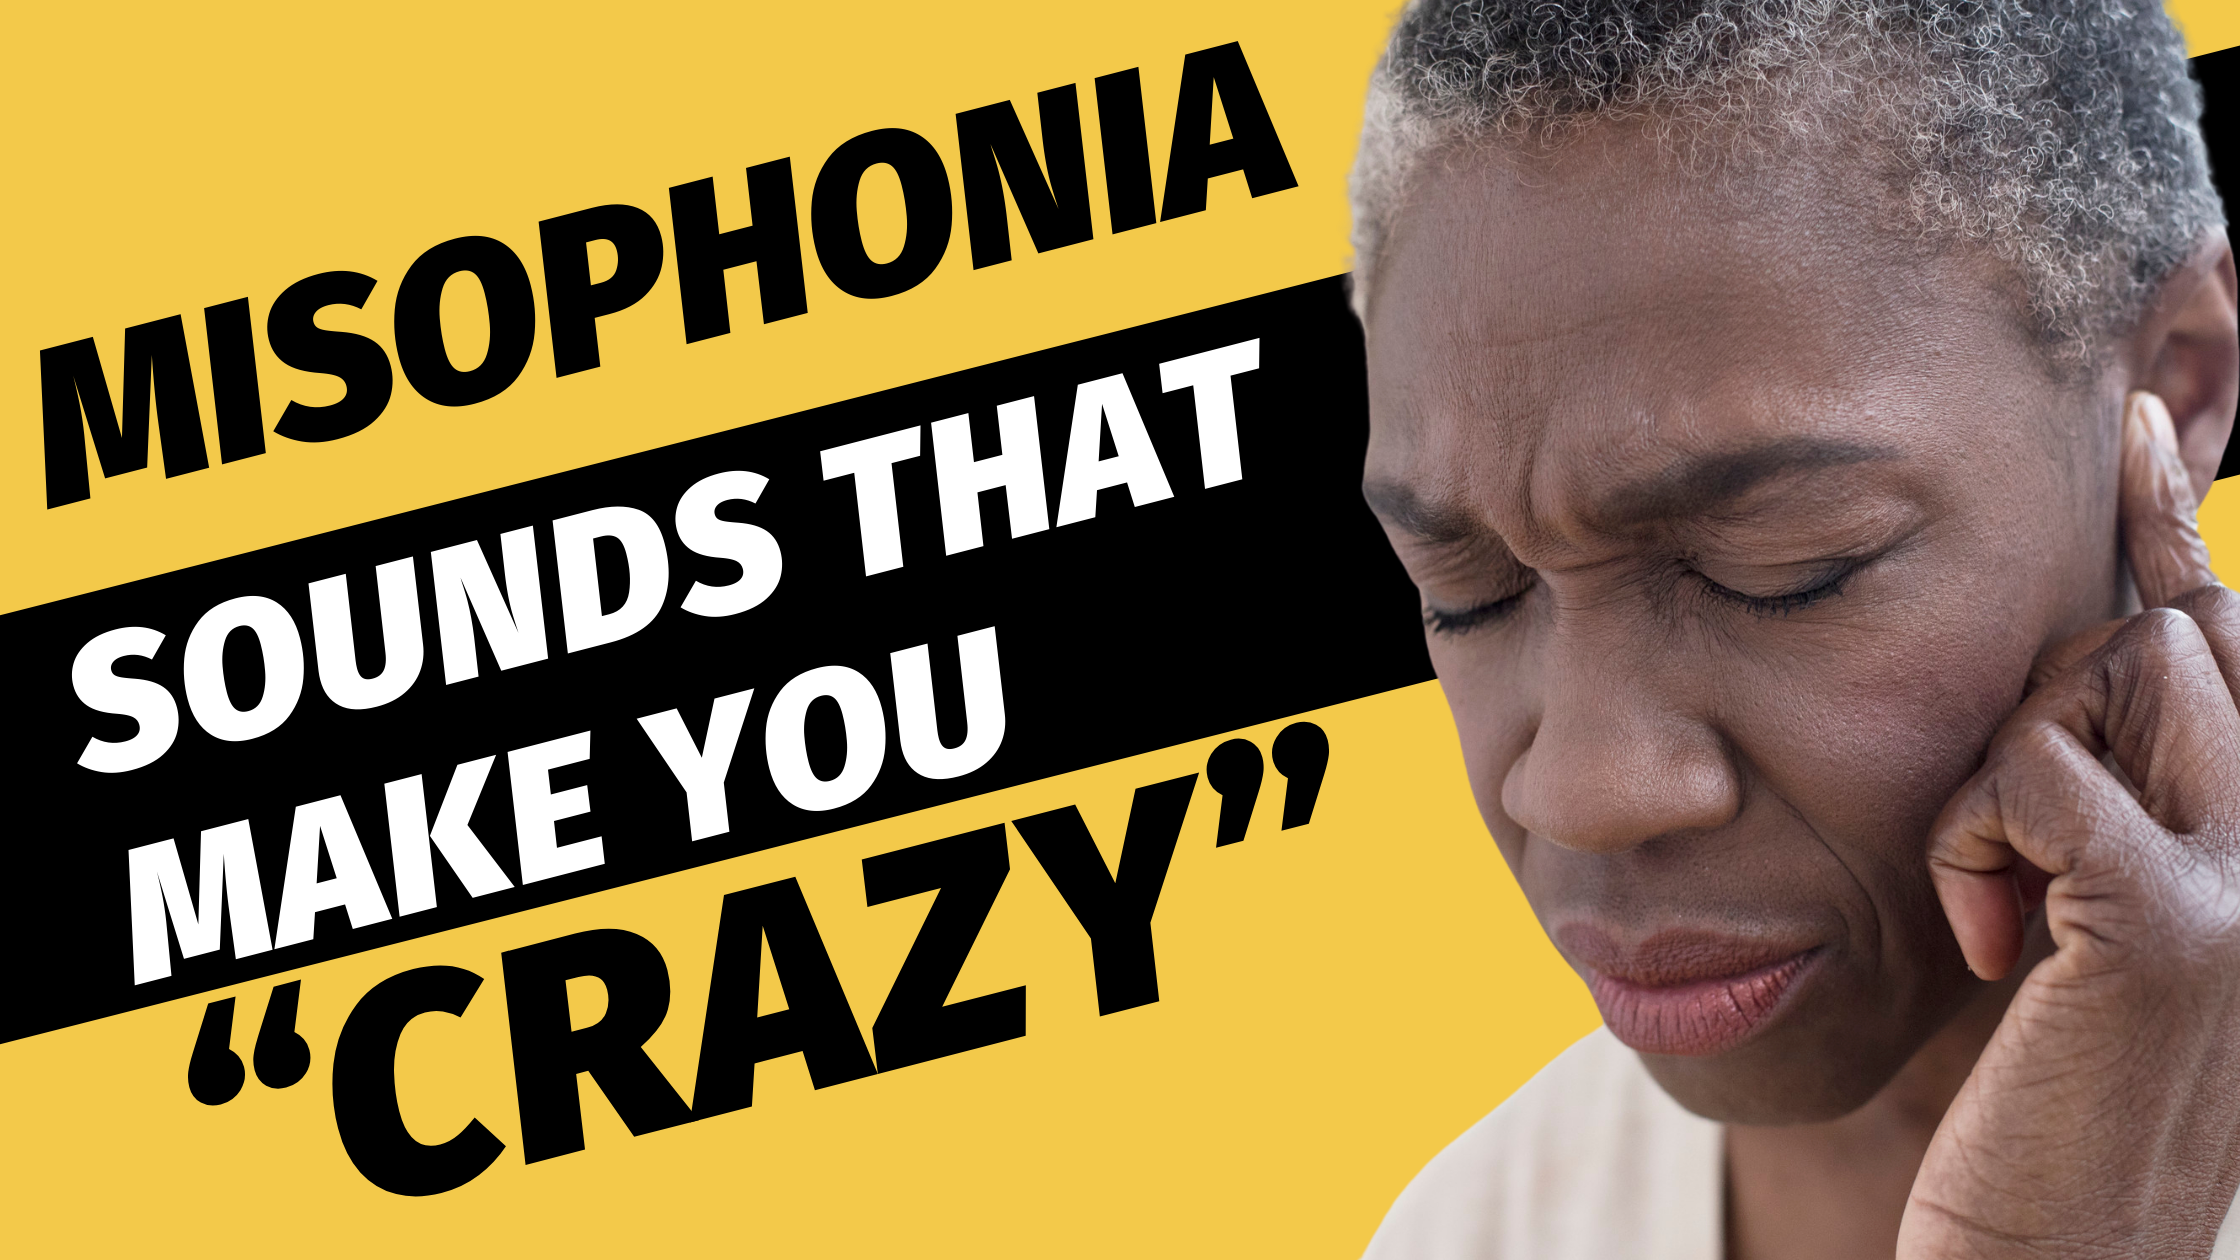 Misophonia: sounds that make you “crazy”